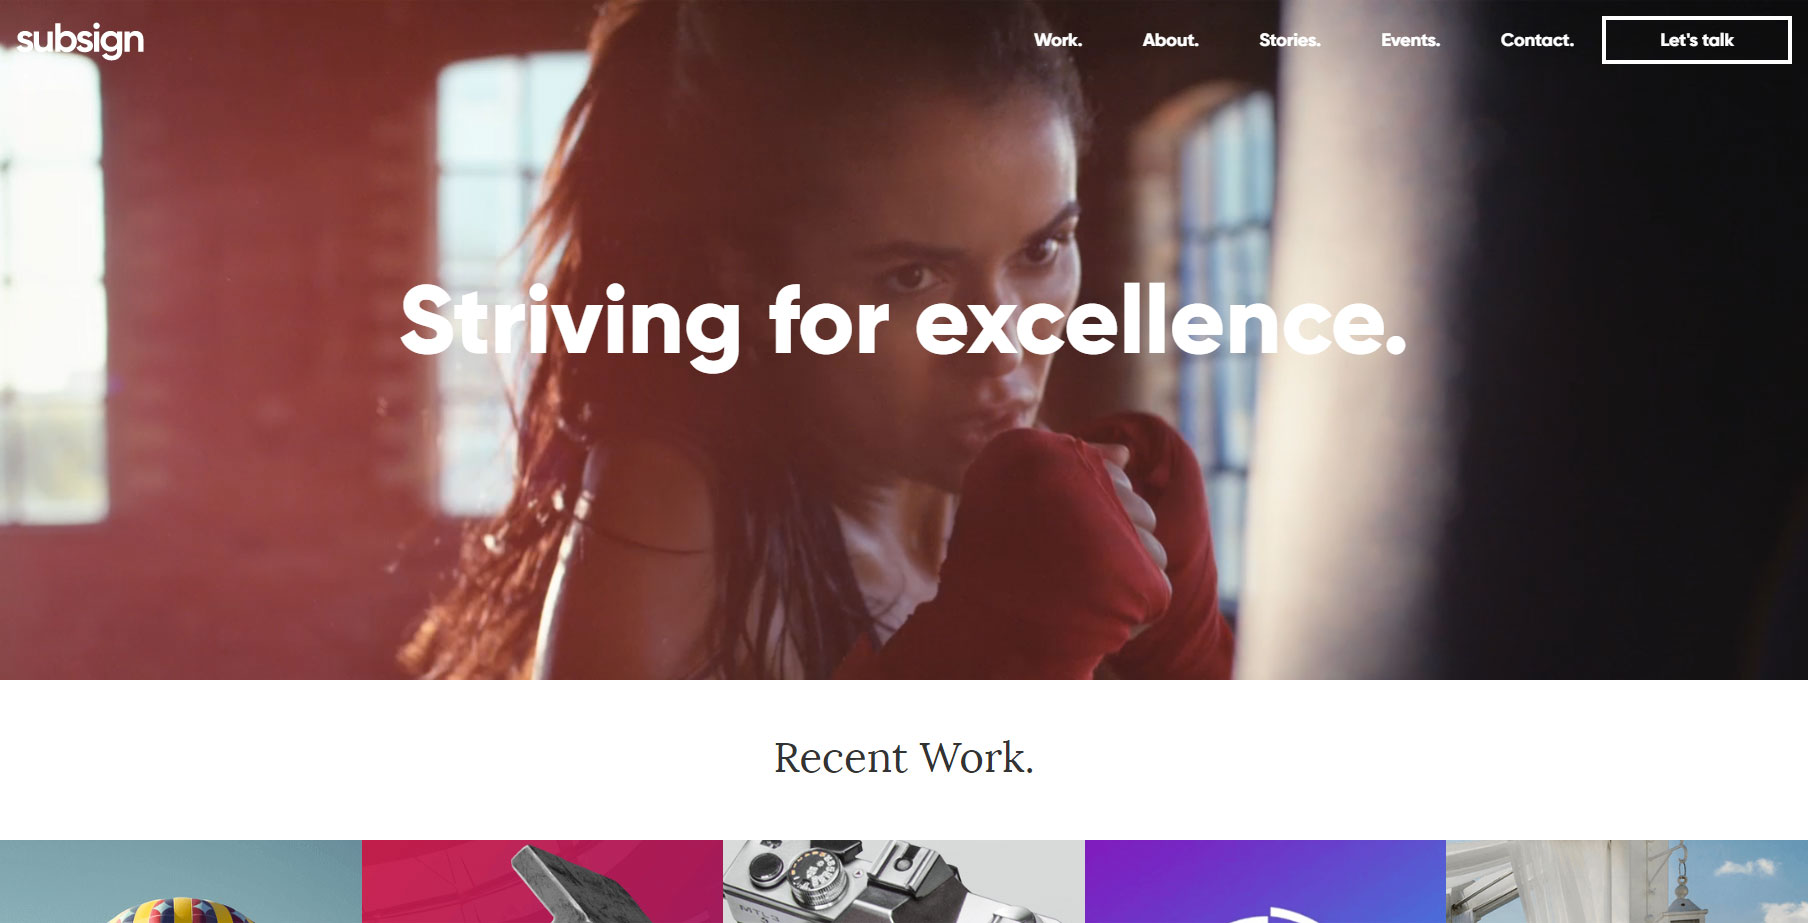 Subsign | Delivering WOW. - Website of the Day